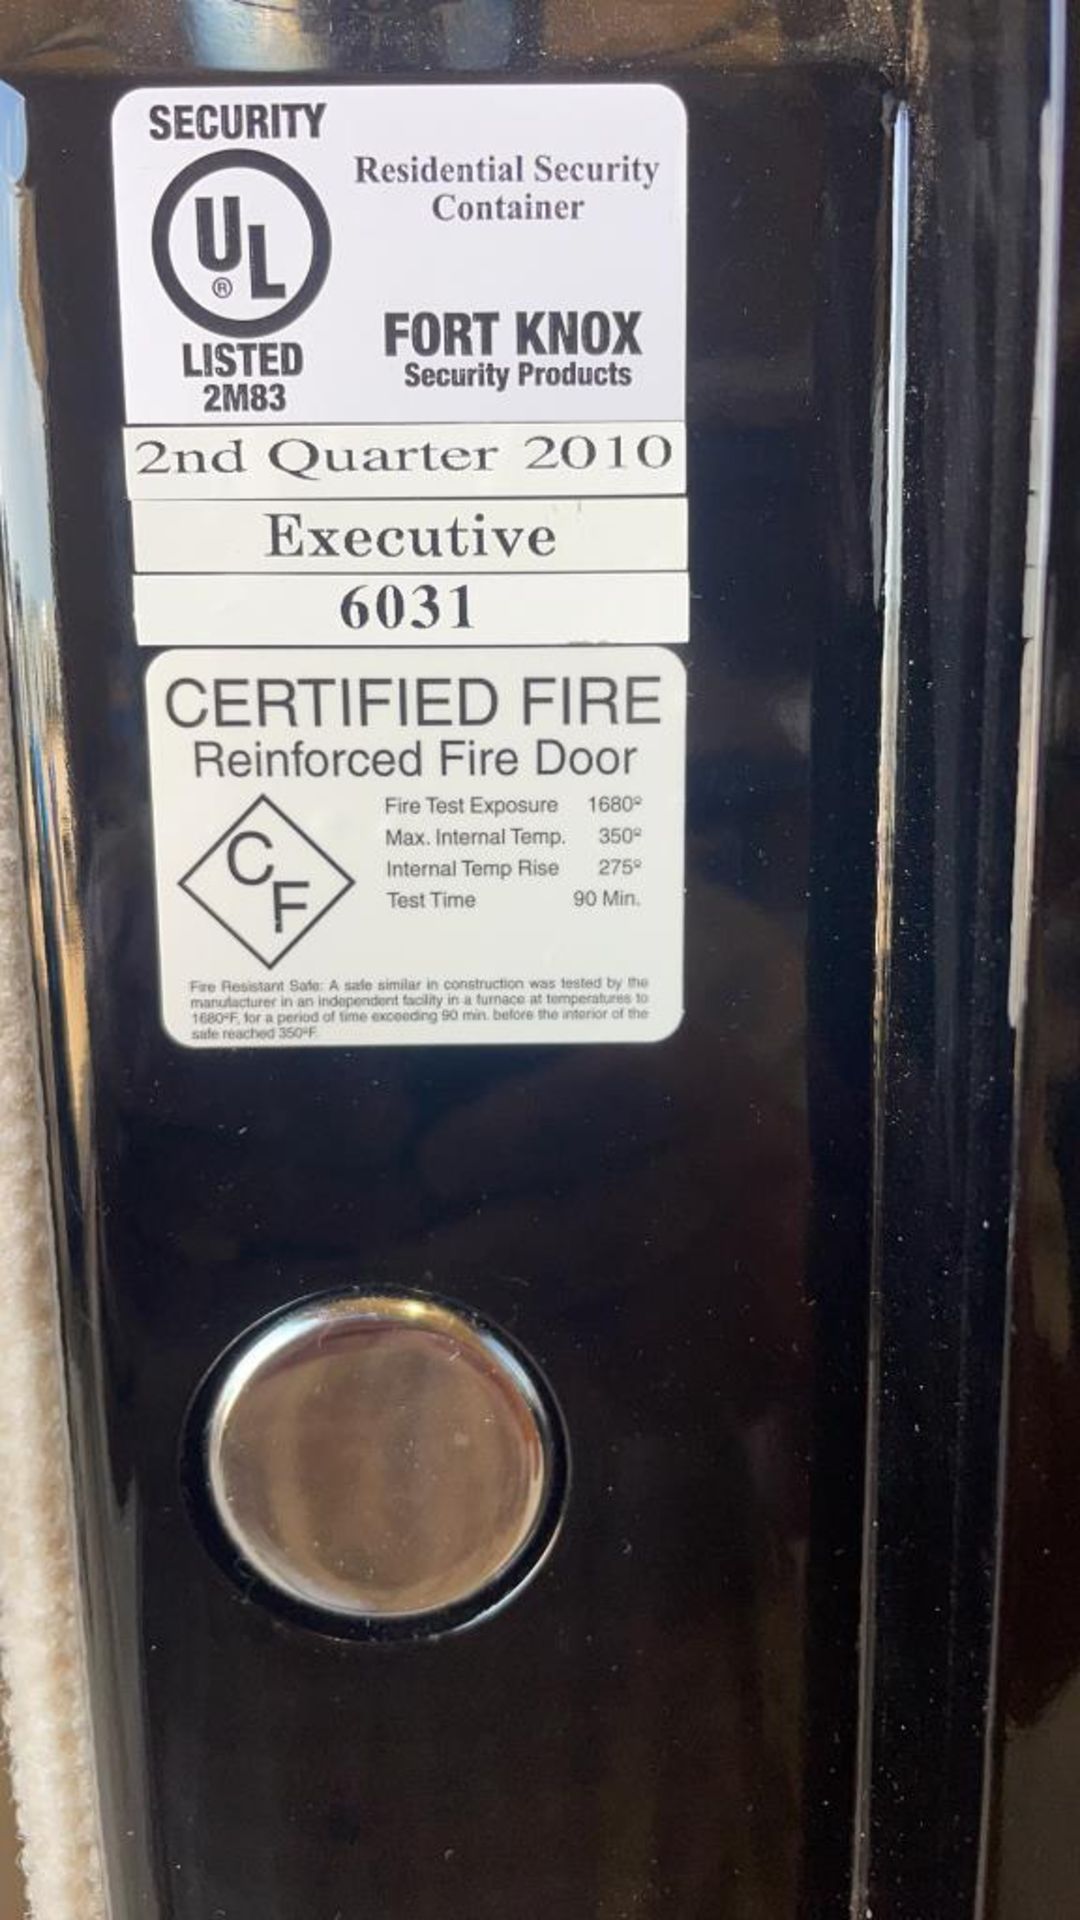 Fort Knox Fire rated Gun safe - Image 12 of 12